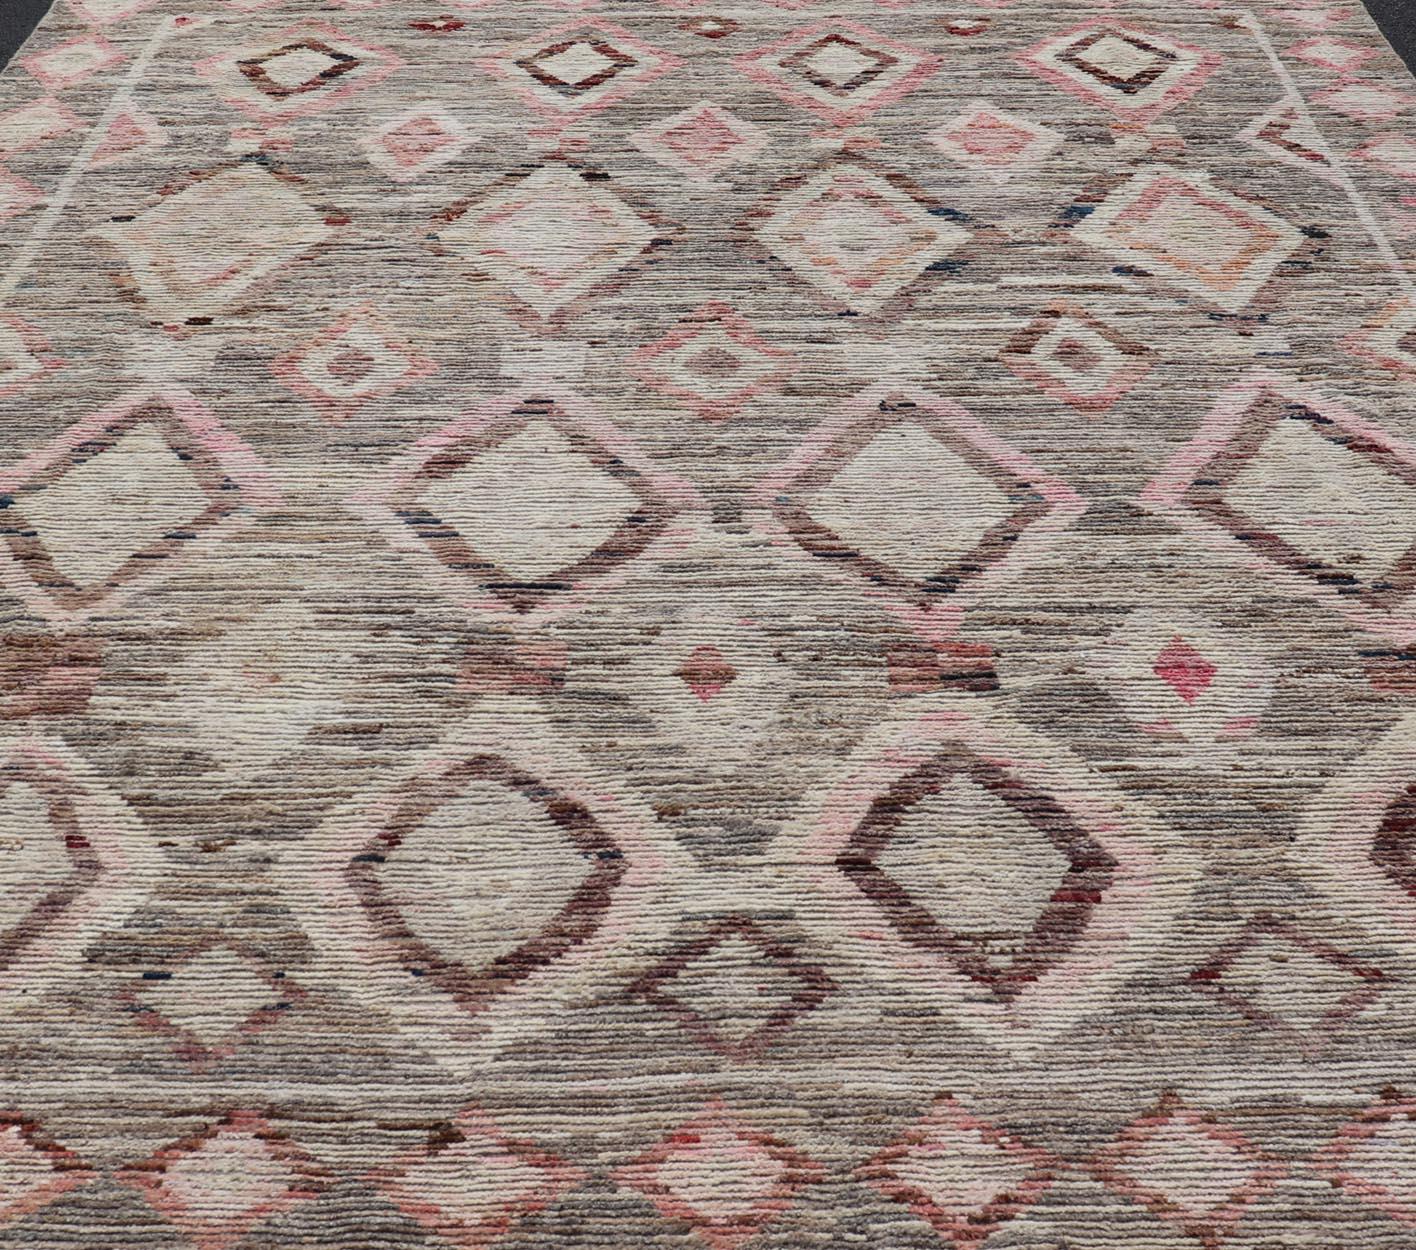 Moroccan Style Modern Hand Knotted Rug In Tribal Design In Brown's, Pink, Gray. Keivan Woven Arts; rug AAR-1002, country of origin / type: Afghanistan / Modern Casual, circa early-21th century.
Measures: 10'3 x 13'5 
This modern casual tribal large